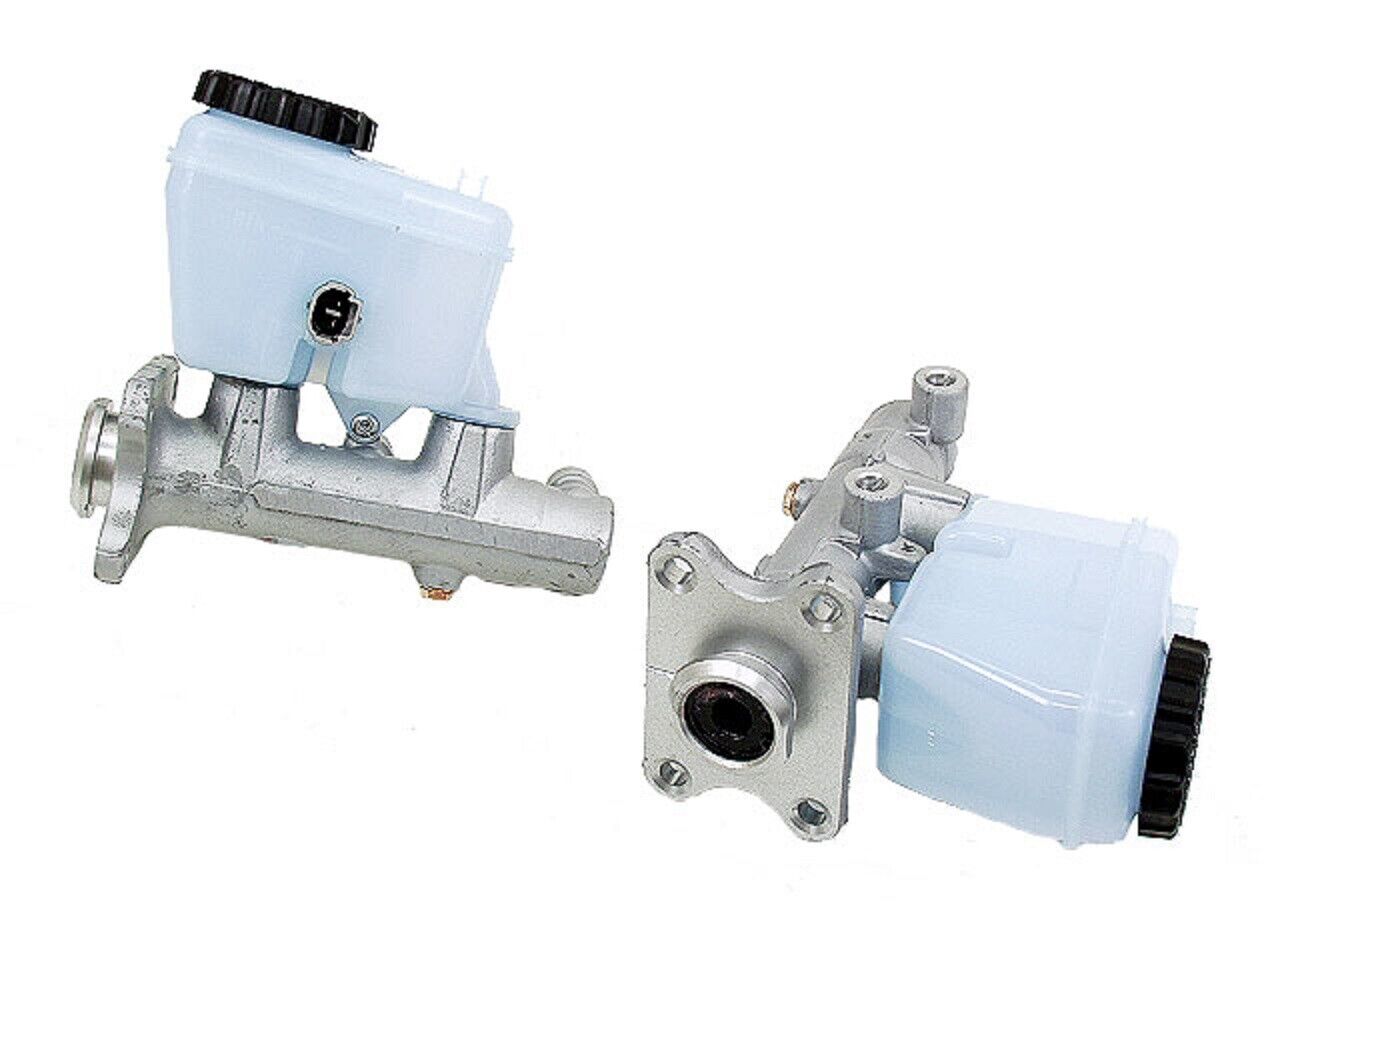 OEM Aisin Brake Master Cylinder w/ Reservoir Tank & Cap for Toyota without ABS